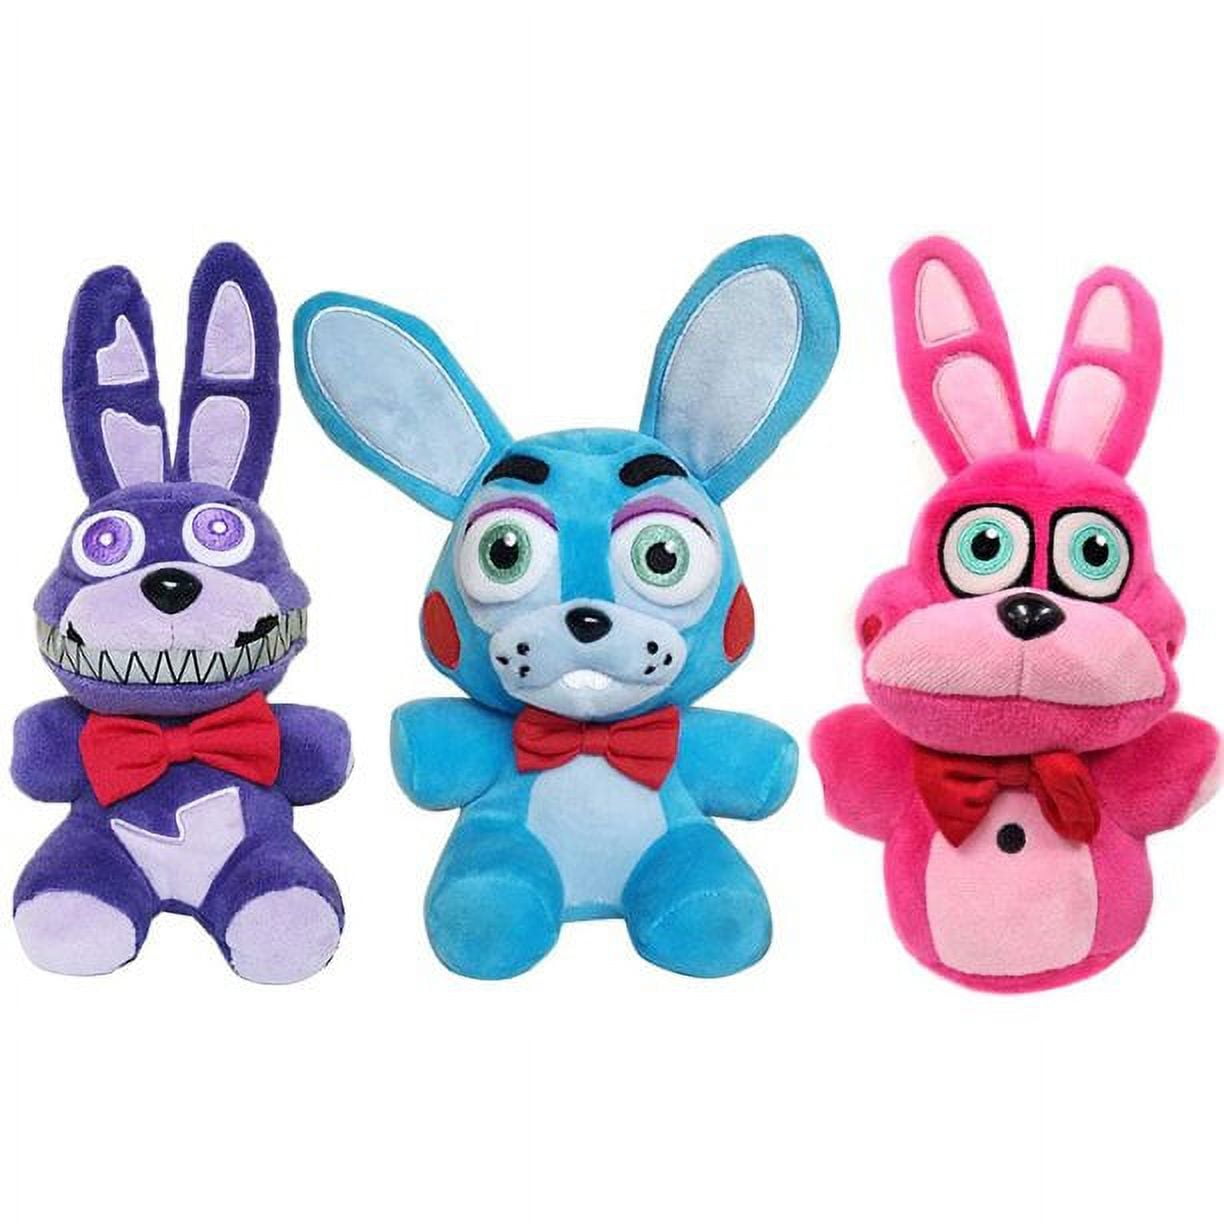 Nightmare Bonnie Plush, Five Nights At Freddy's Plush Toys, Fnaf Plushies  Stuffed Animal Gifts For Children 8 Inch